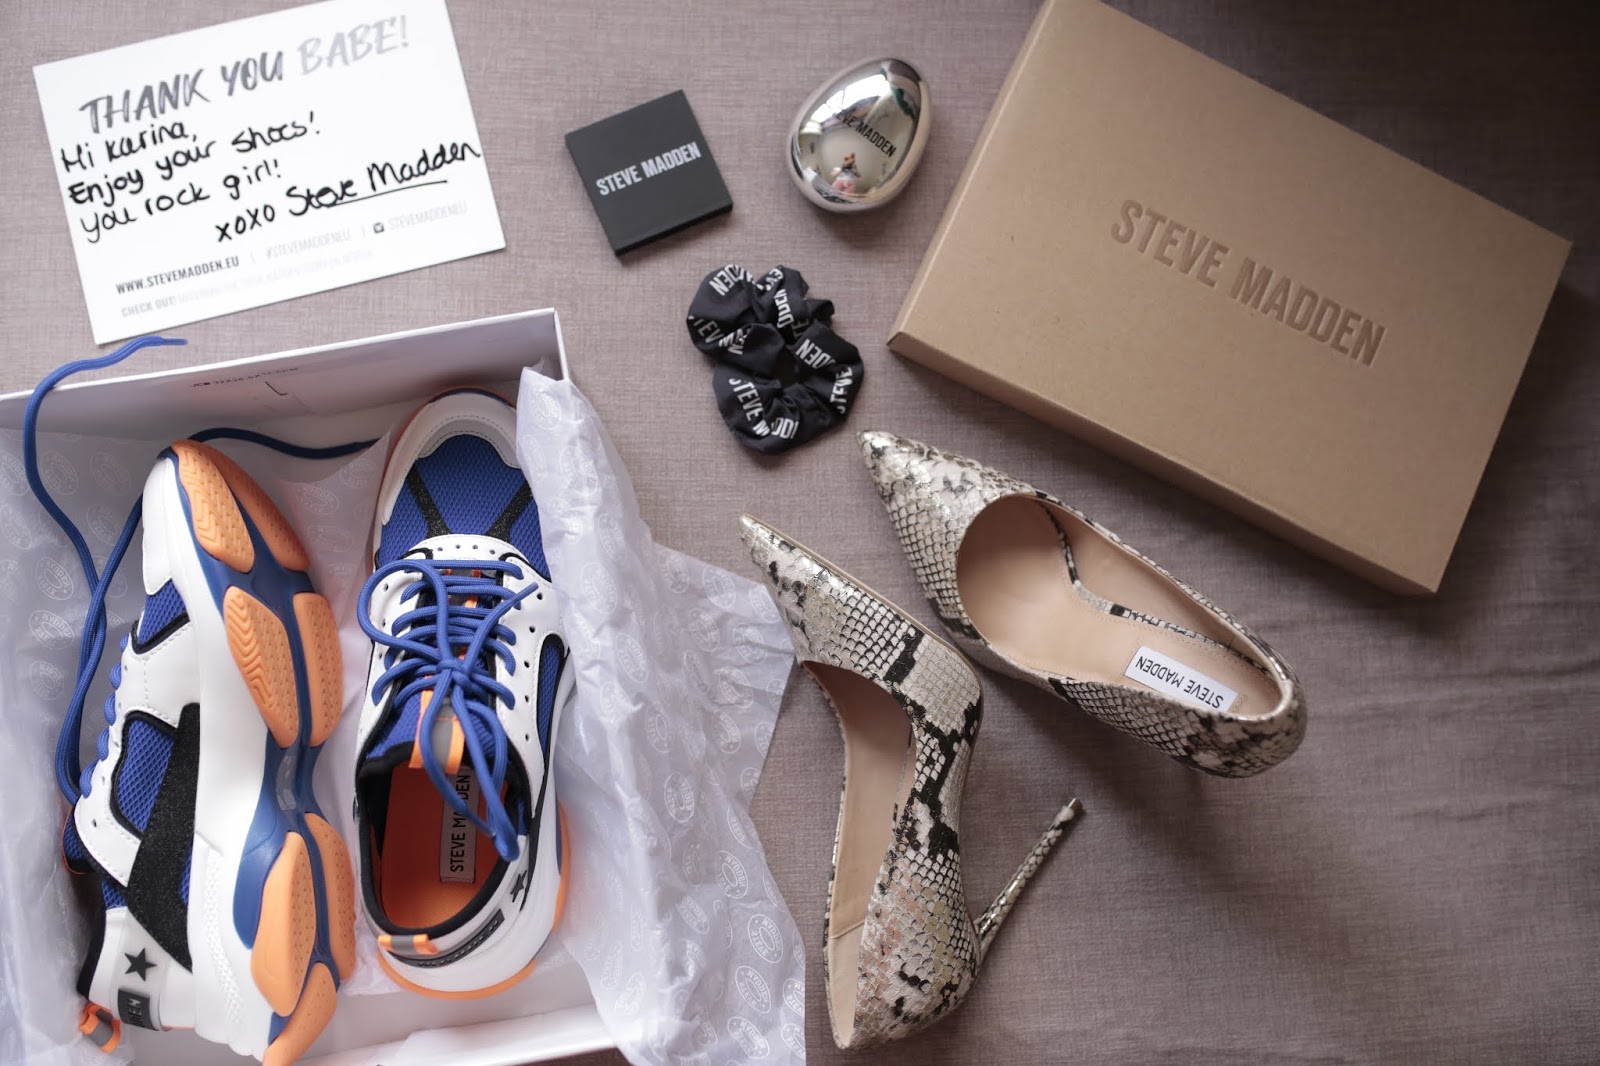 STEVE MADDEN SUMMER COLLECTION - True Beauty Comes From Within